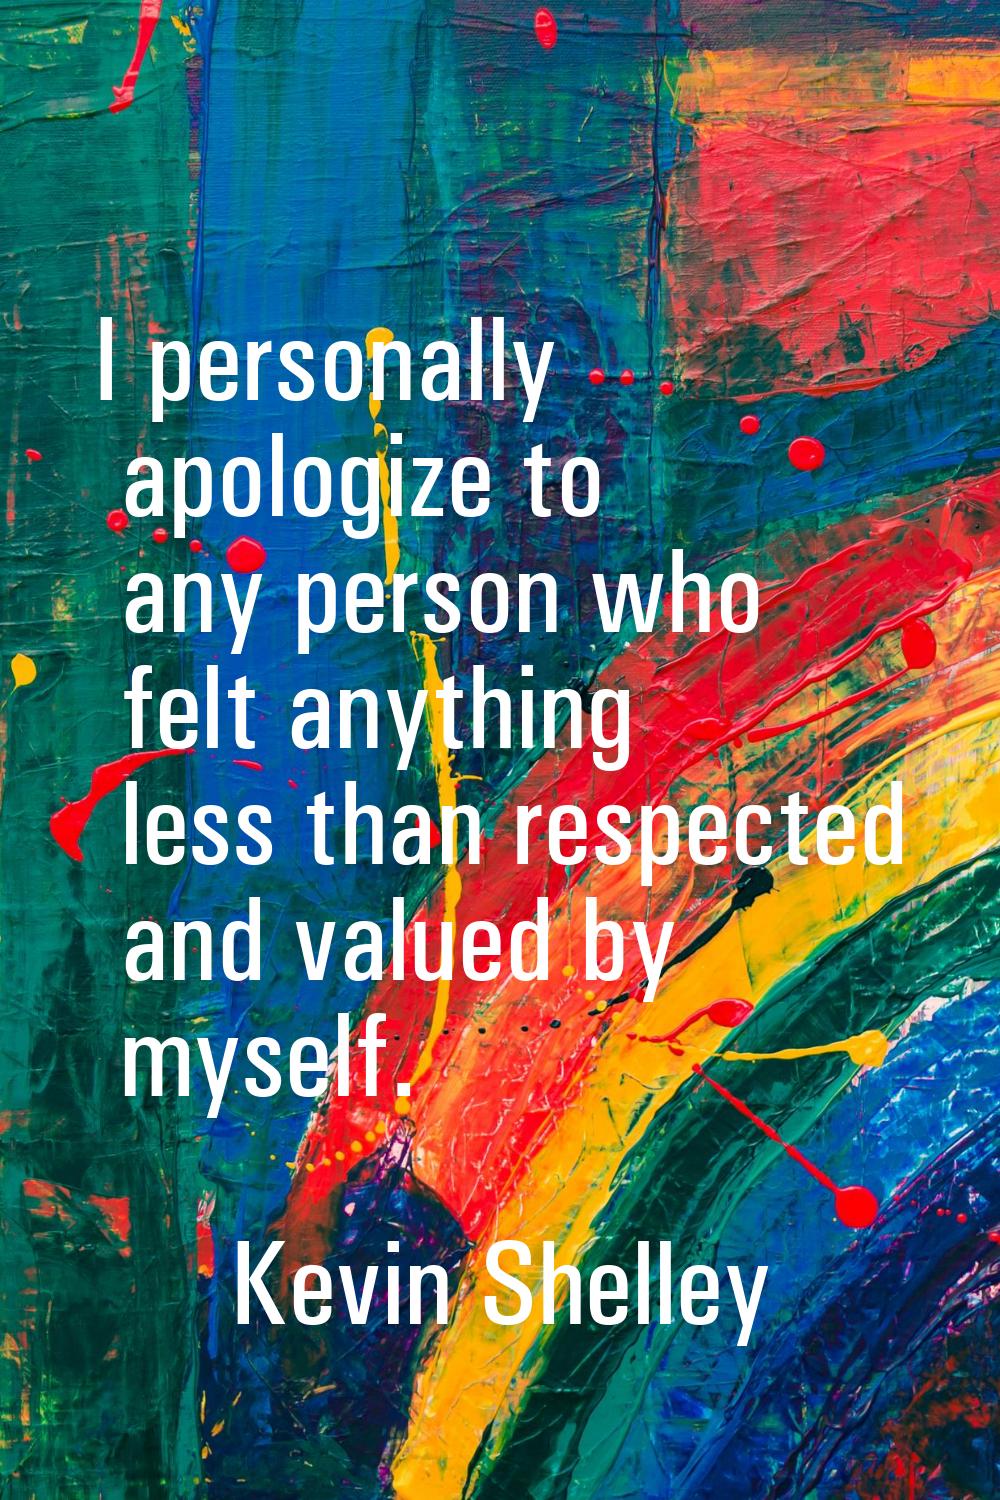 I personally apologize to any person who felt anything less than respected and valued by myself.